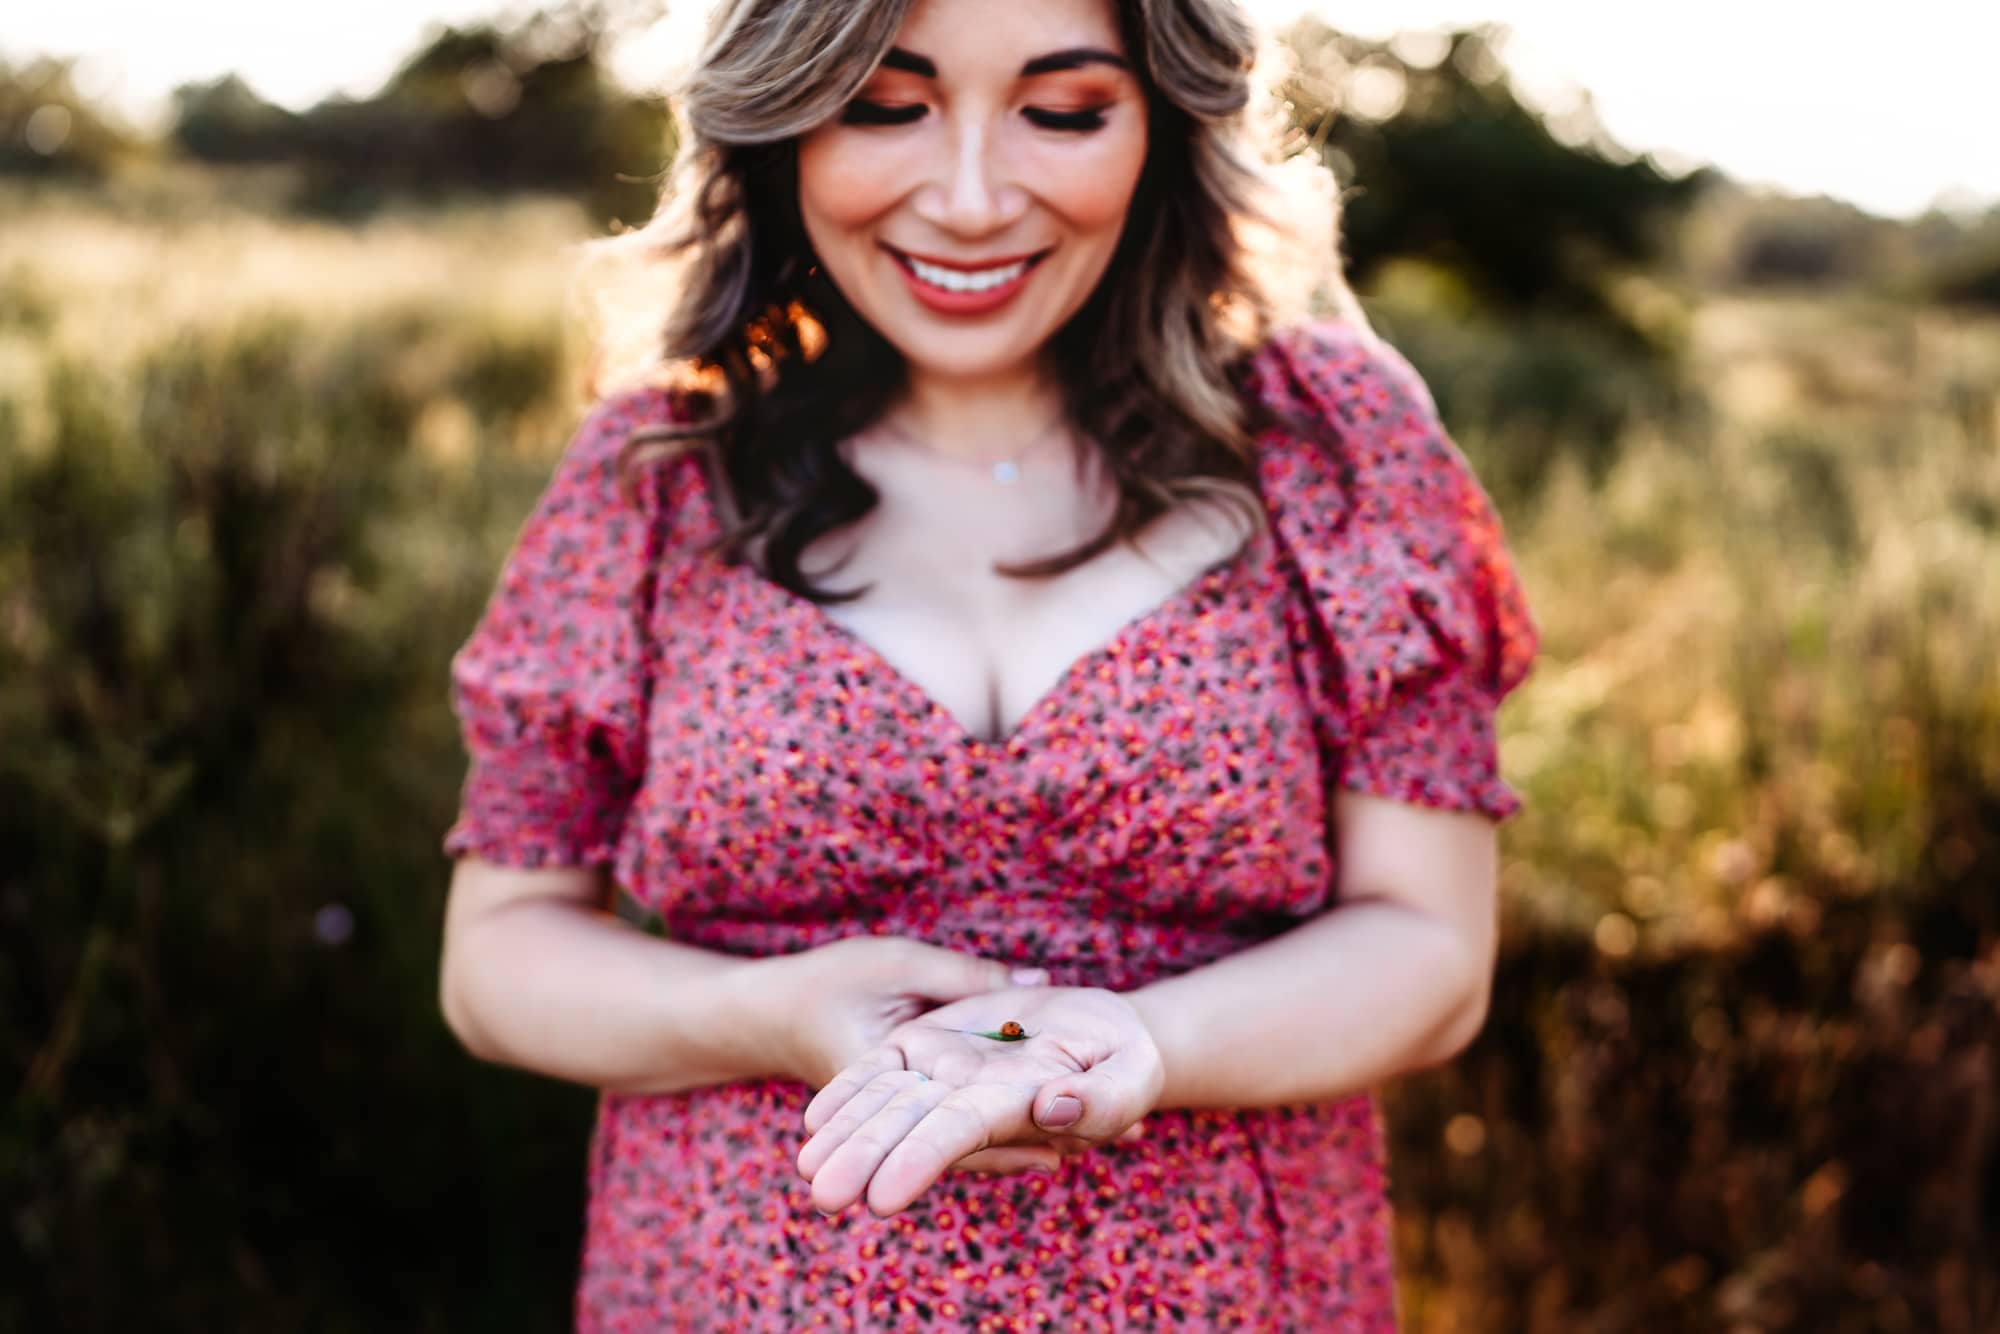 A pregnant woman in a pink dress looking down and smiling at a ladybug in her hand during a San Diego lifestyle maternity session by Love Michelle Photography.